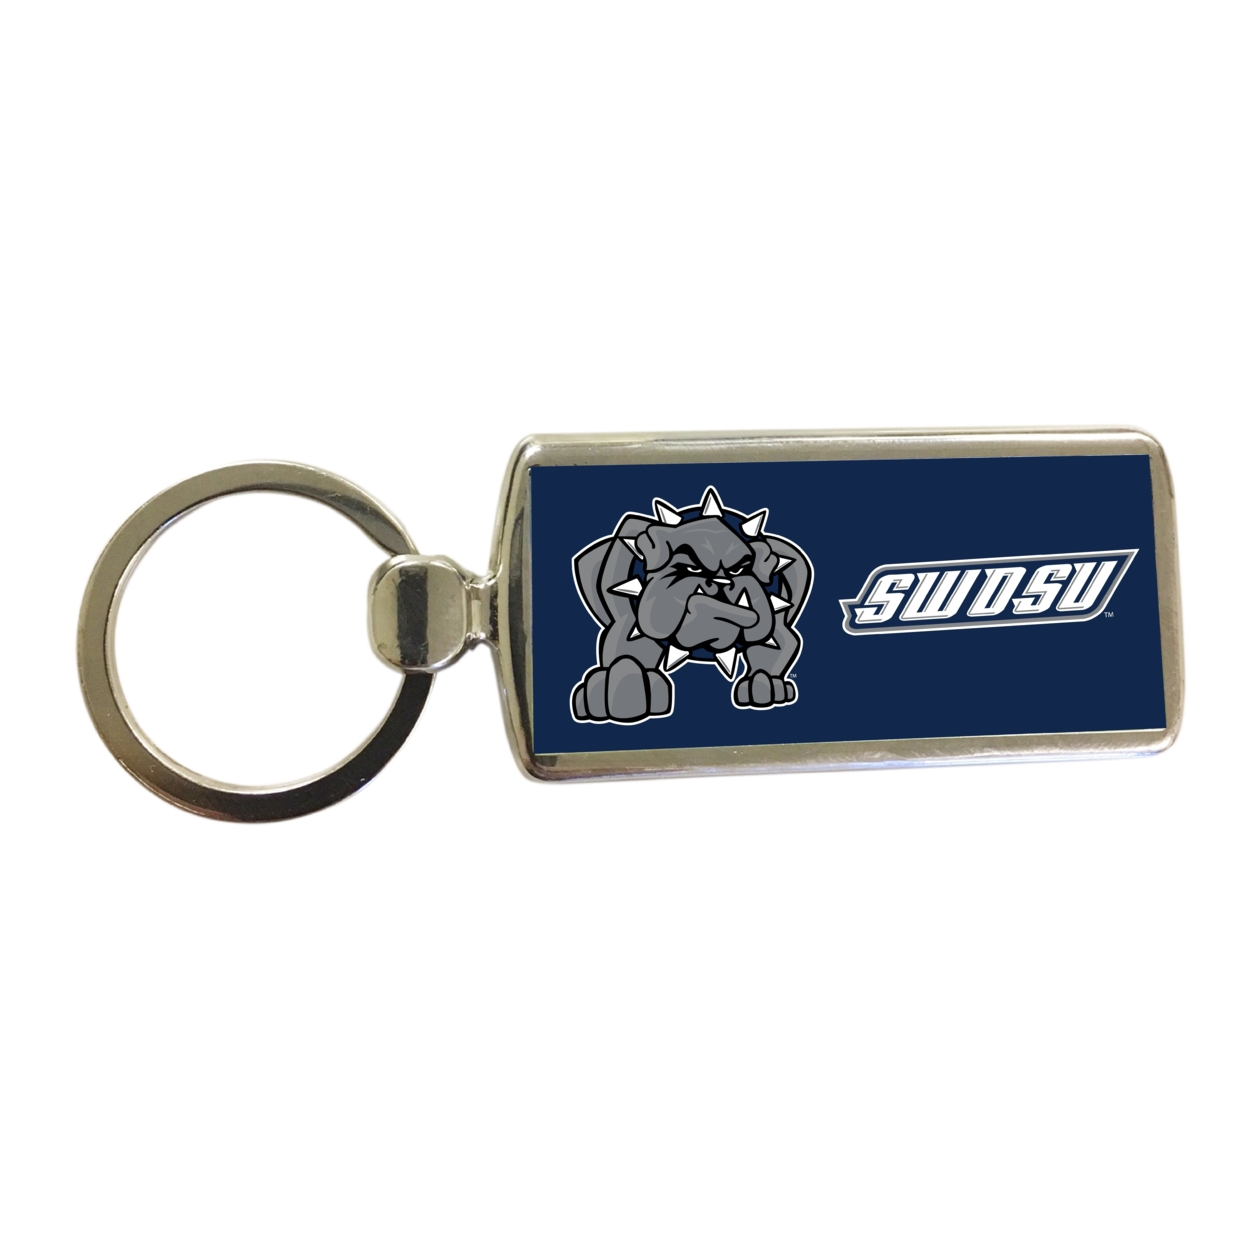 R And R Imports Southwestern Oklahoma State University Metal Keychain